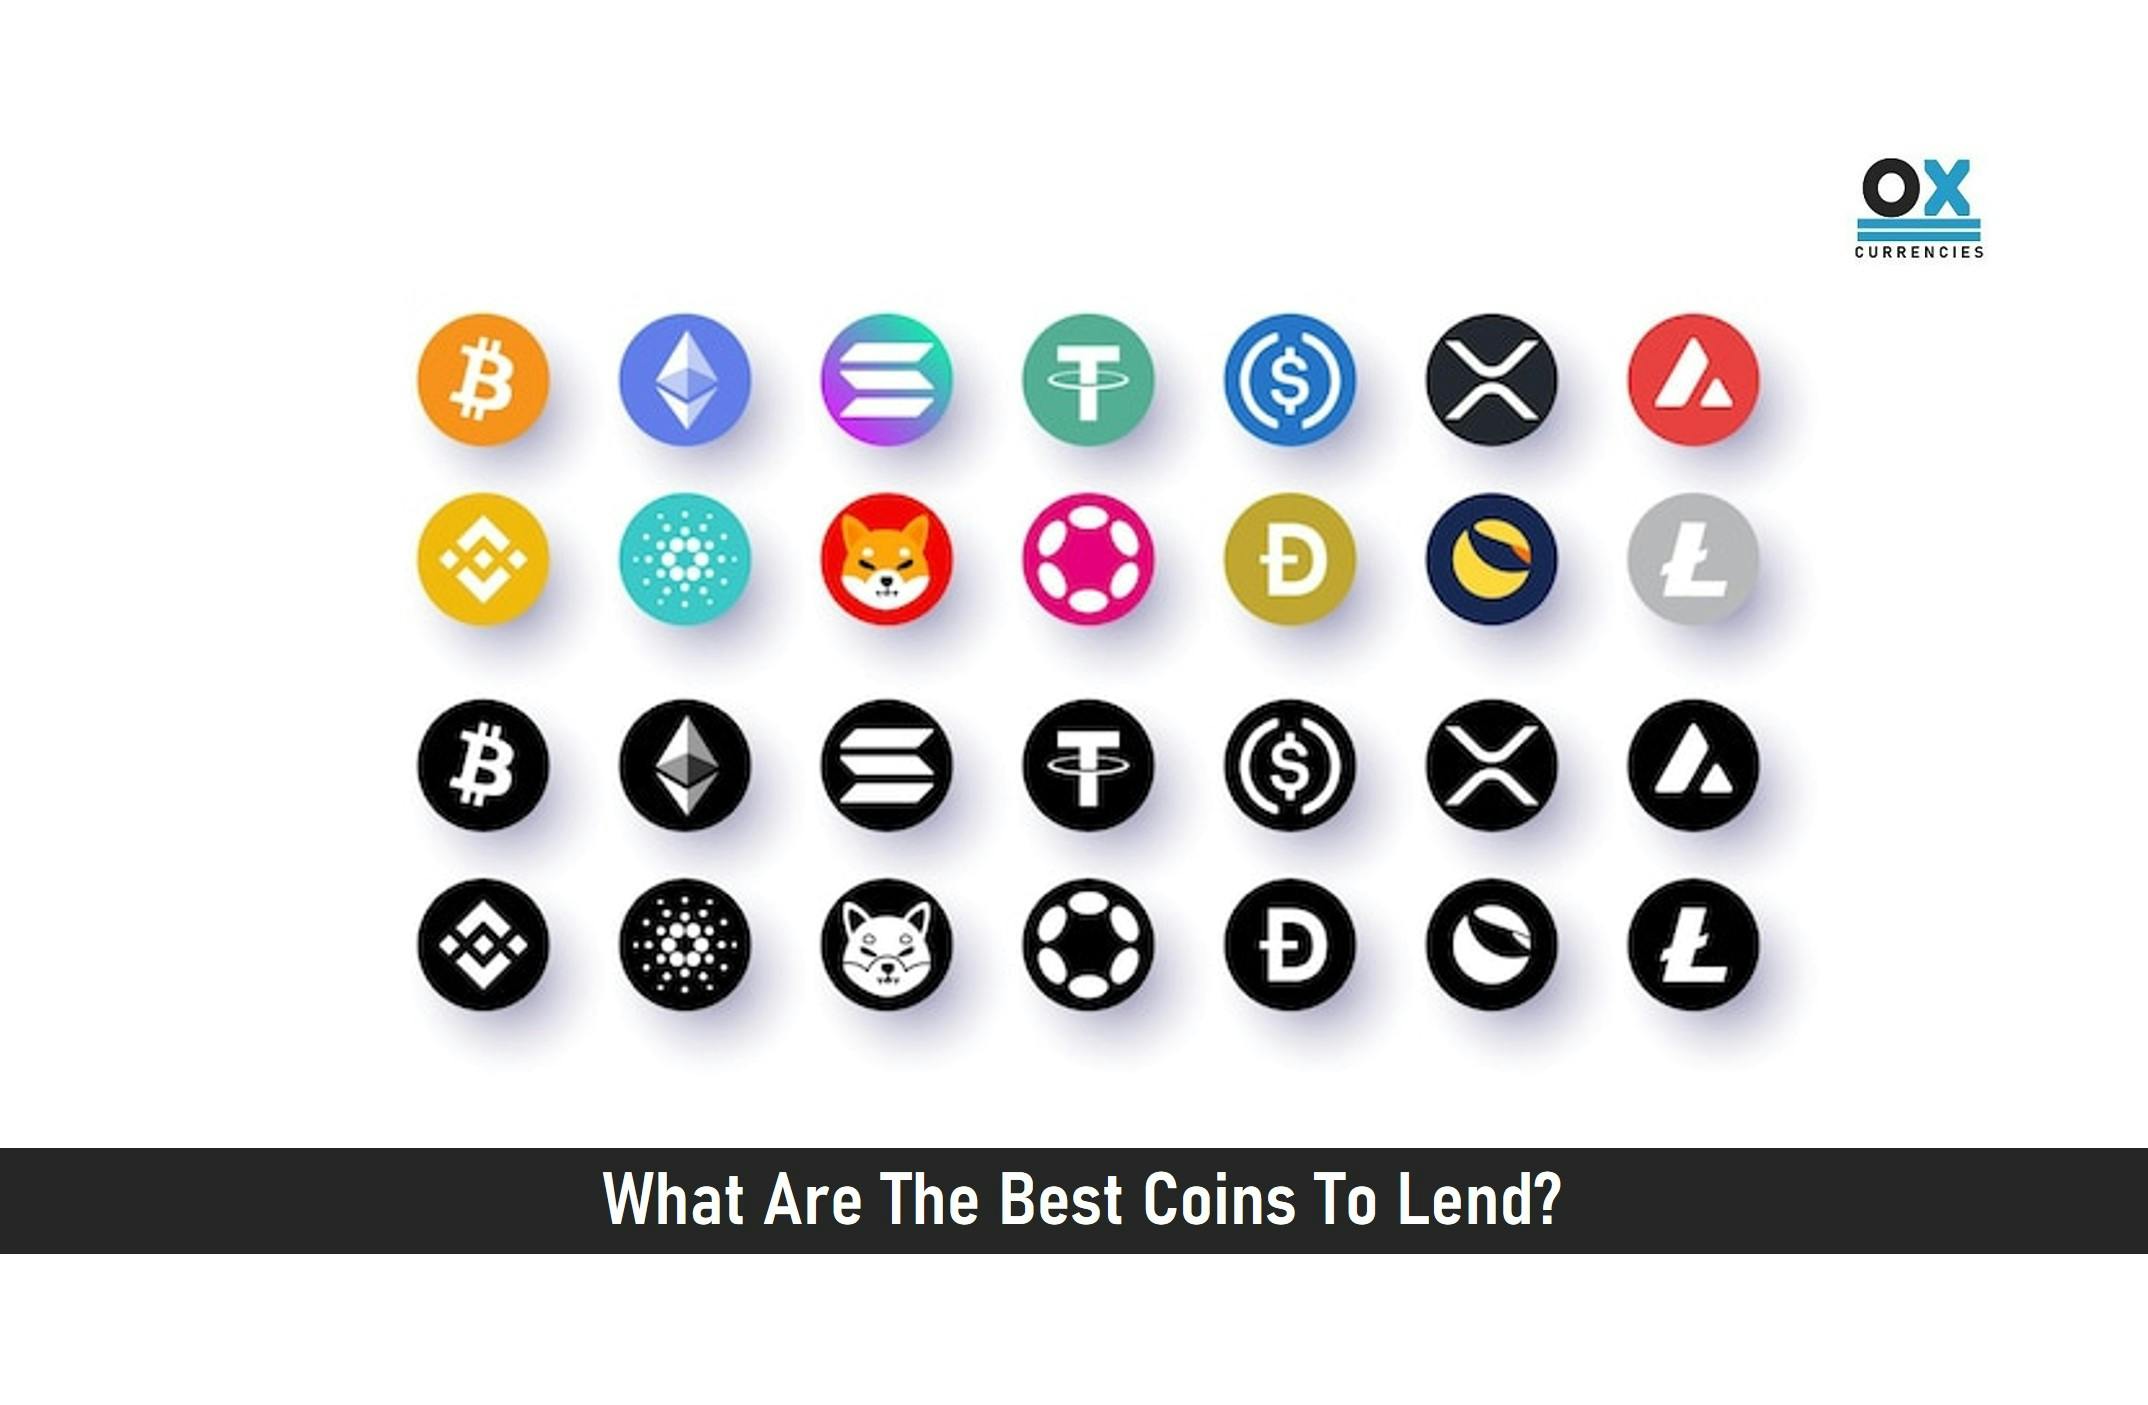 What Are The Best Coins To Lend?